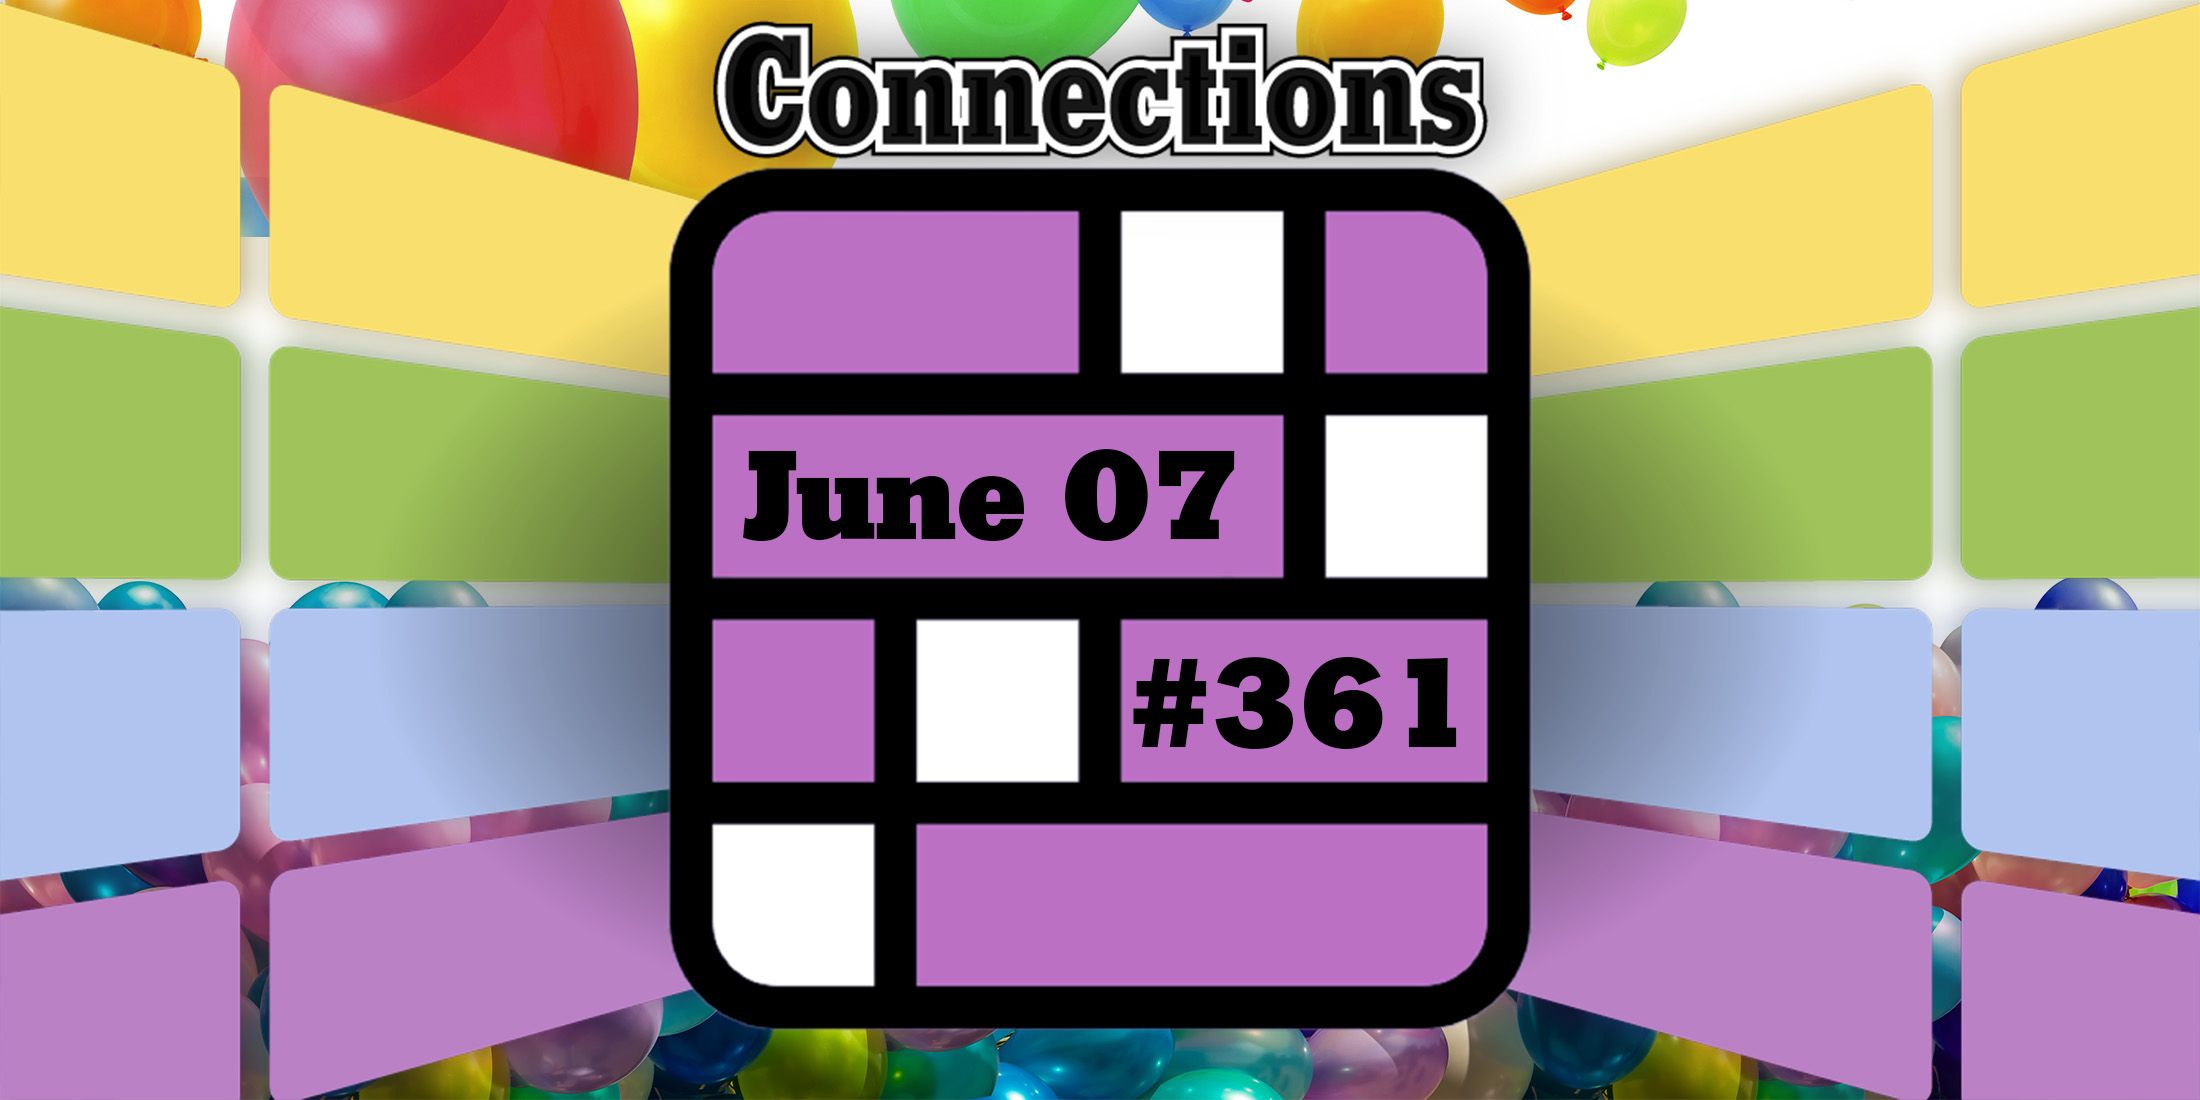 Balloon party for fun day Friday in Connections June 7